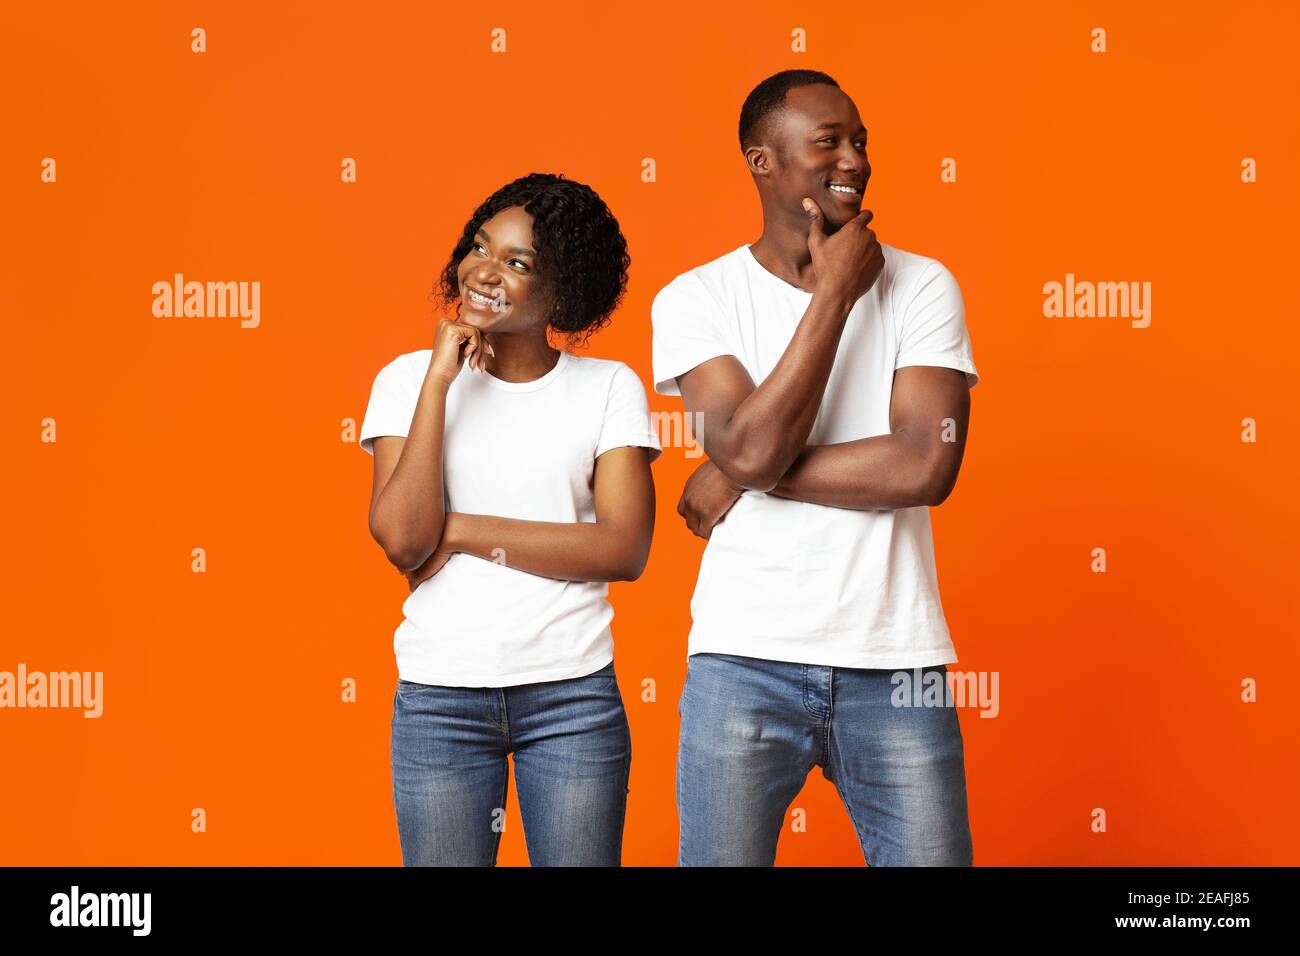 Young black couple day dreaming on orange background Stock Photo